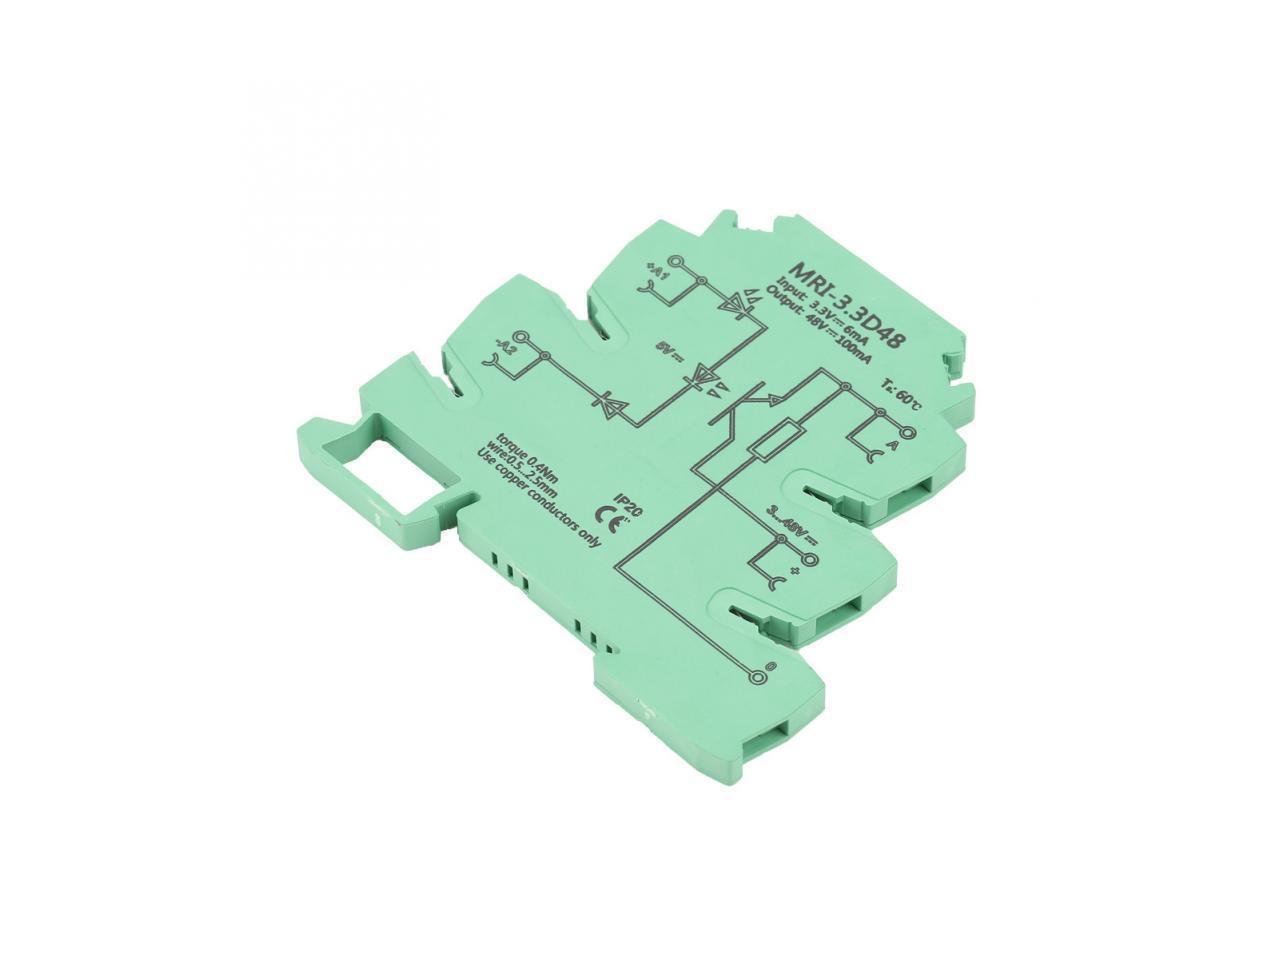 Relay MRI-3.3D48 DC Photoelectrical Coupler Isolating PLC Relay Module Input